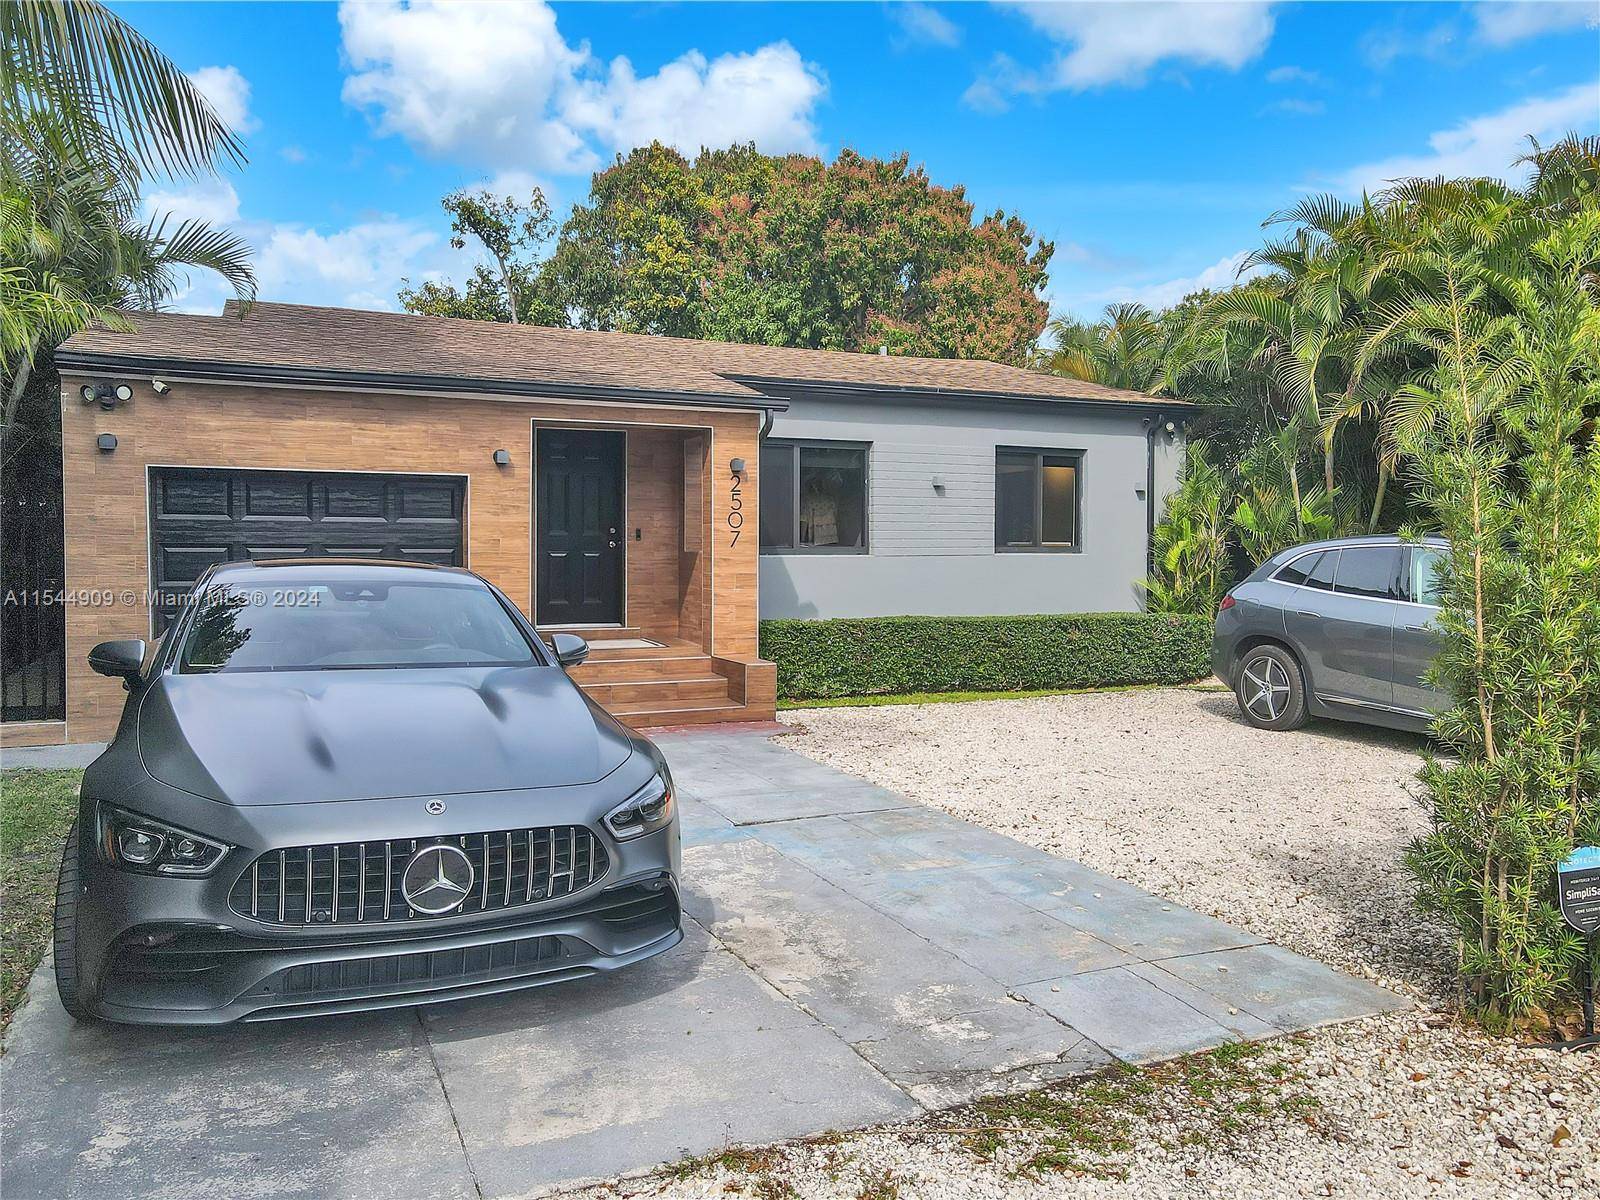 Turnkey home ! Perhaps you have always dreamed of having your own recording studio at home, the crown jewel of these 3 beds, 1 1 2 bath home is the ...